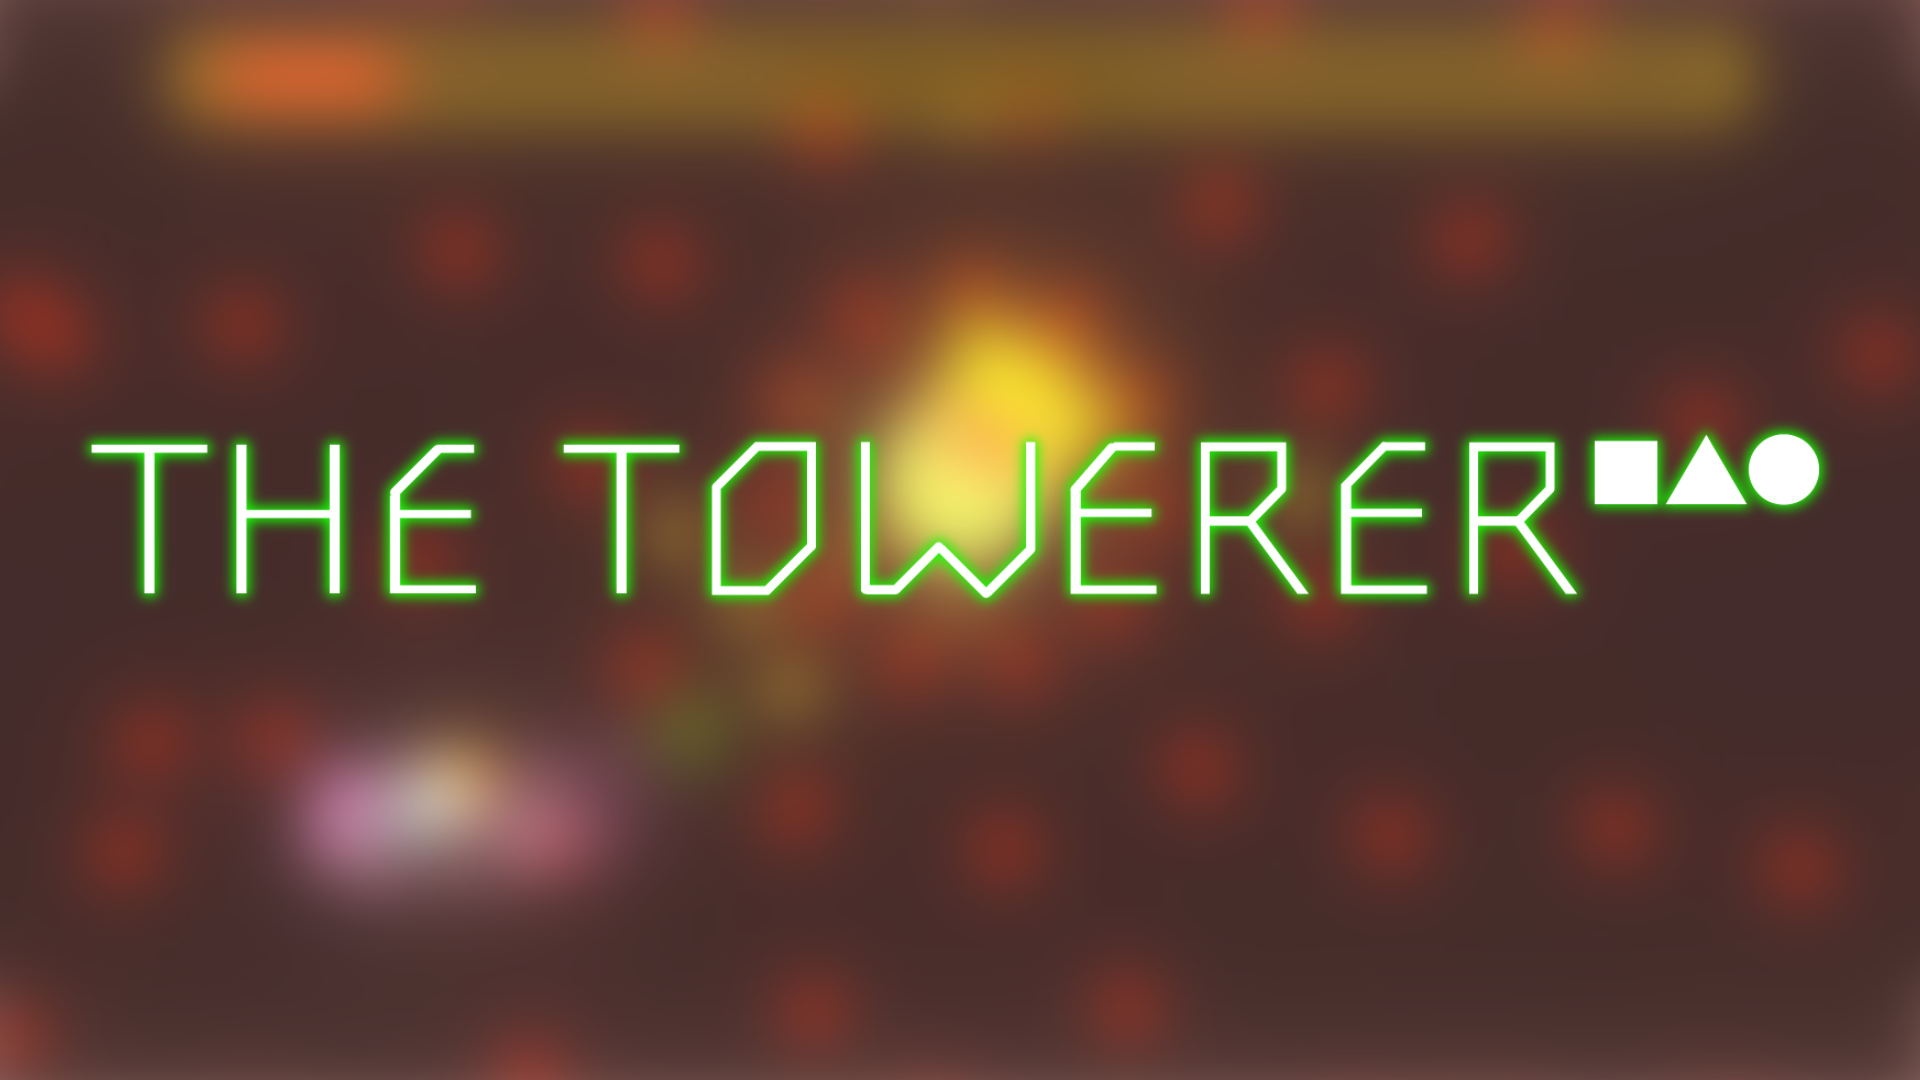 Play The Towerer